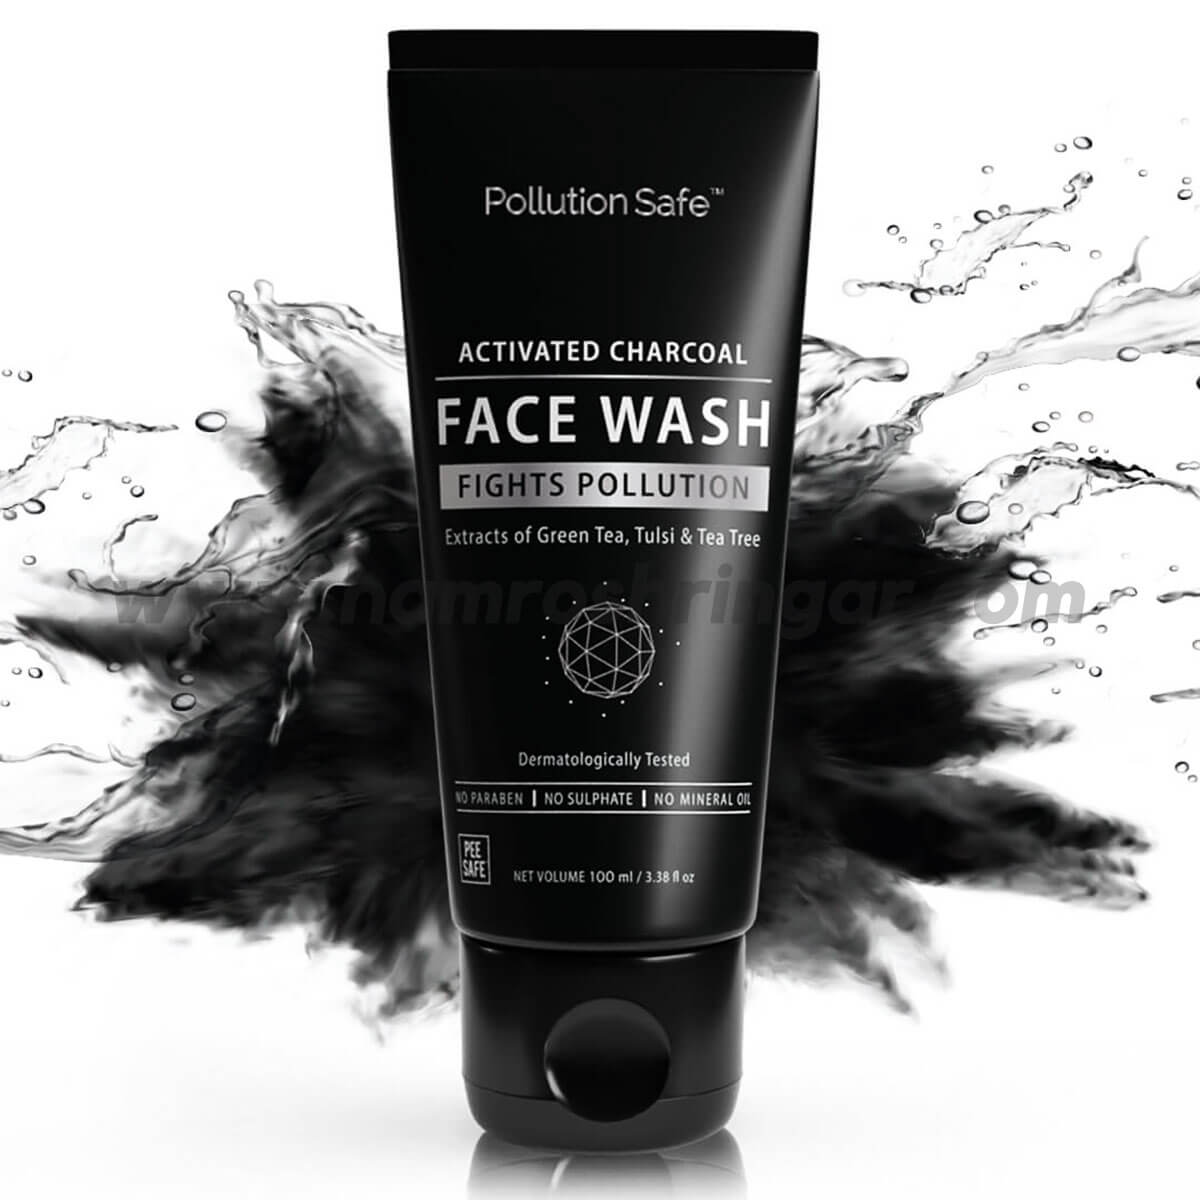 Pollution Safe Activated Charcoal Face Wash Goodness of Green Tea and ...